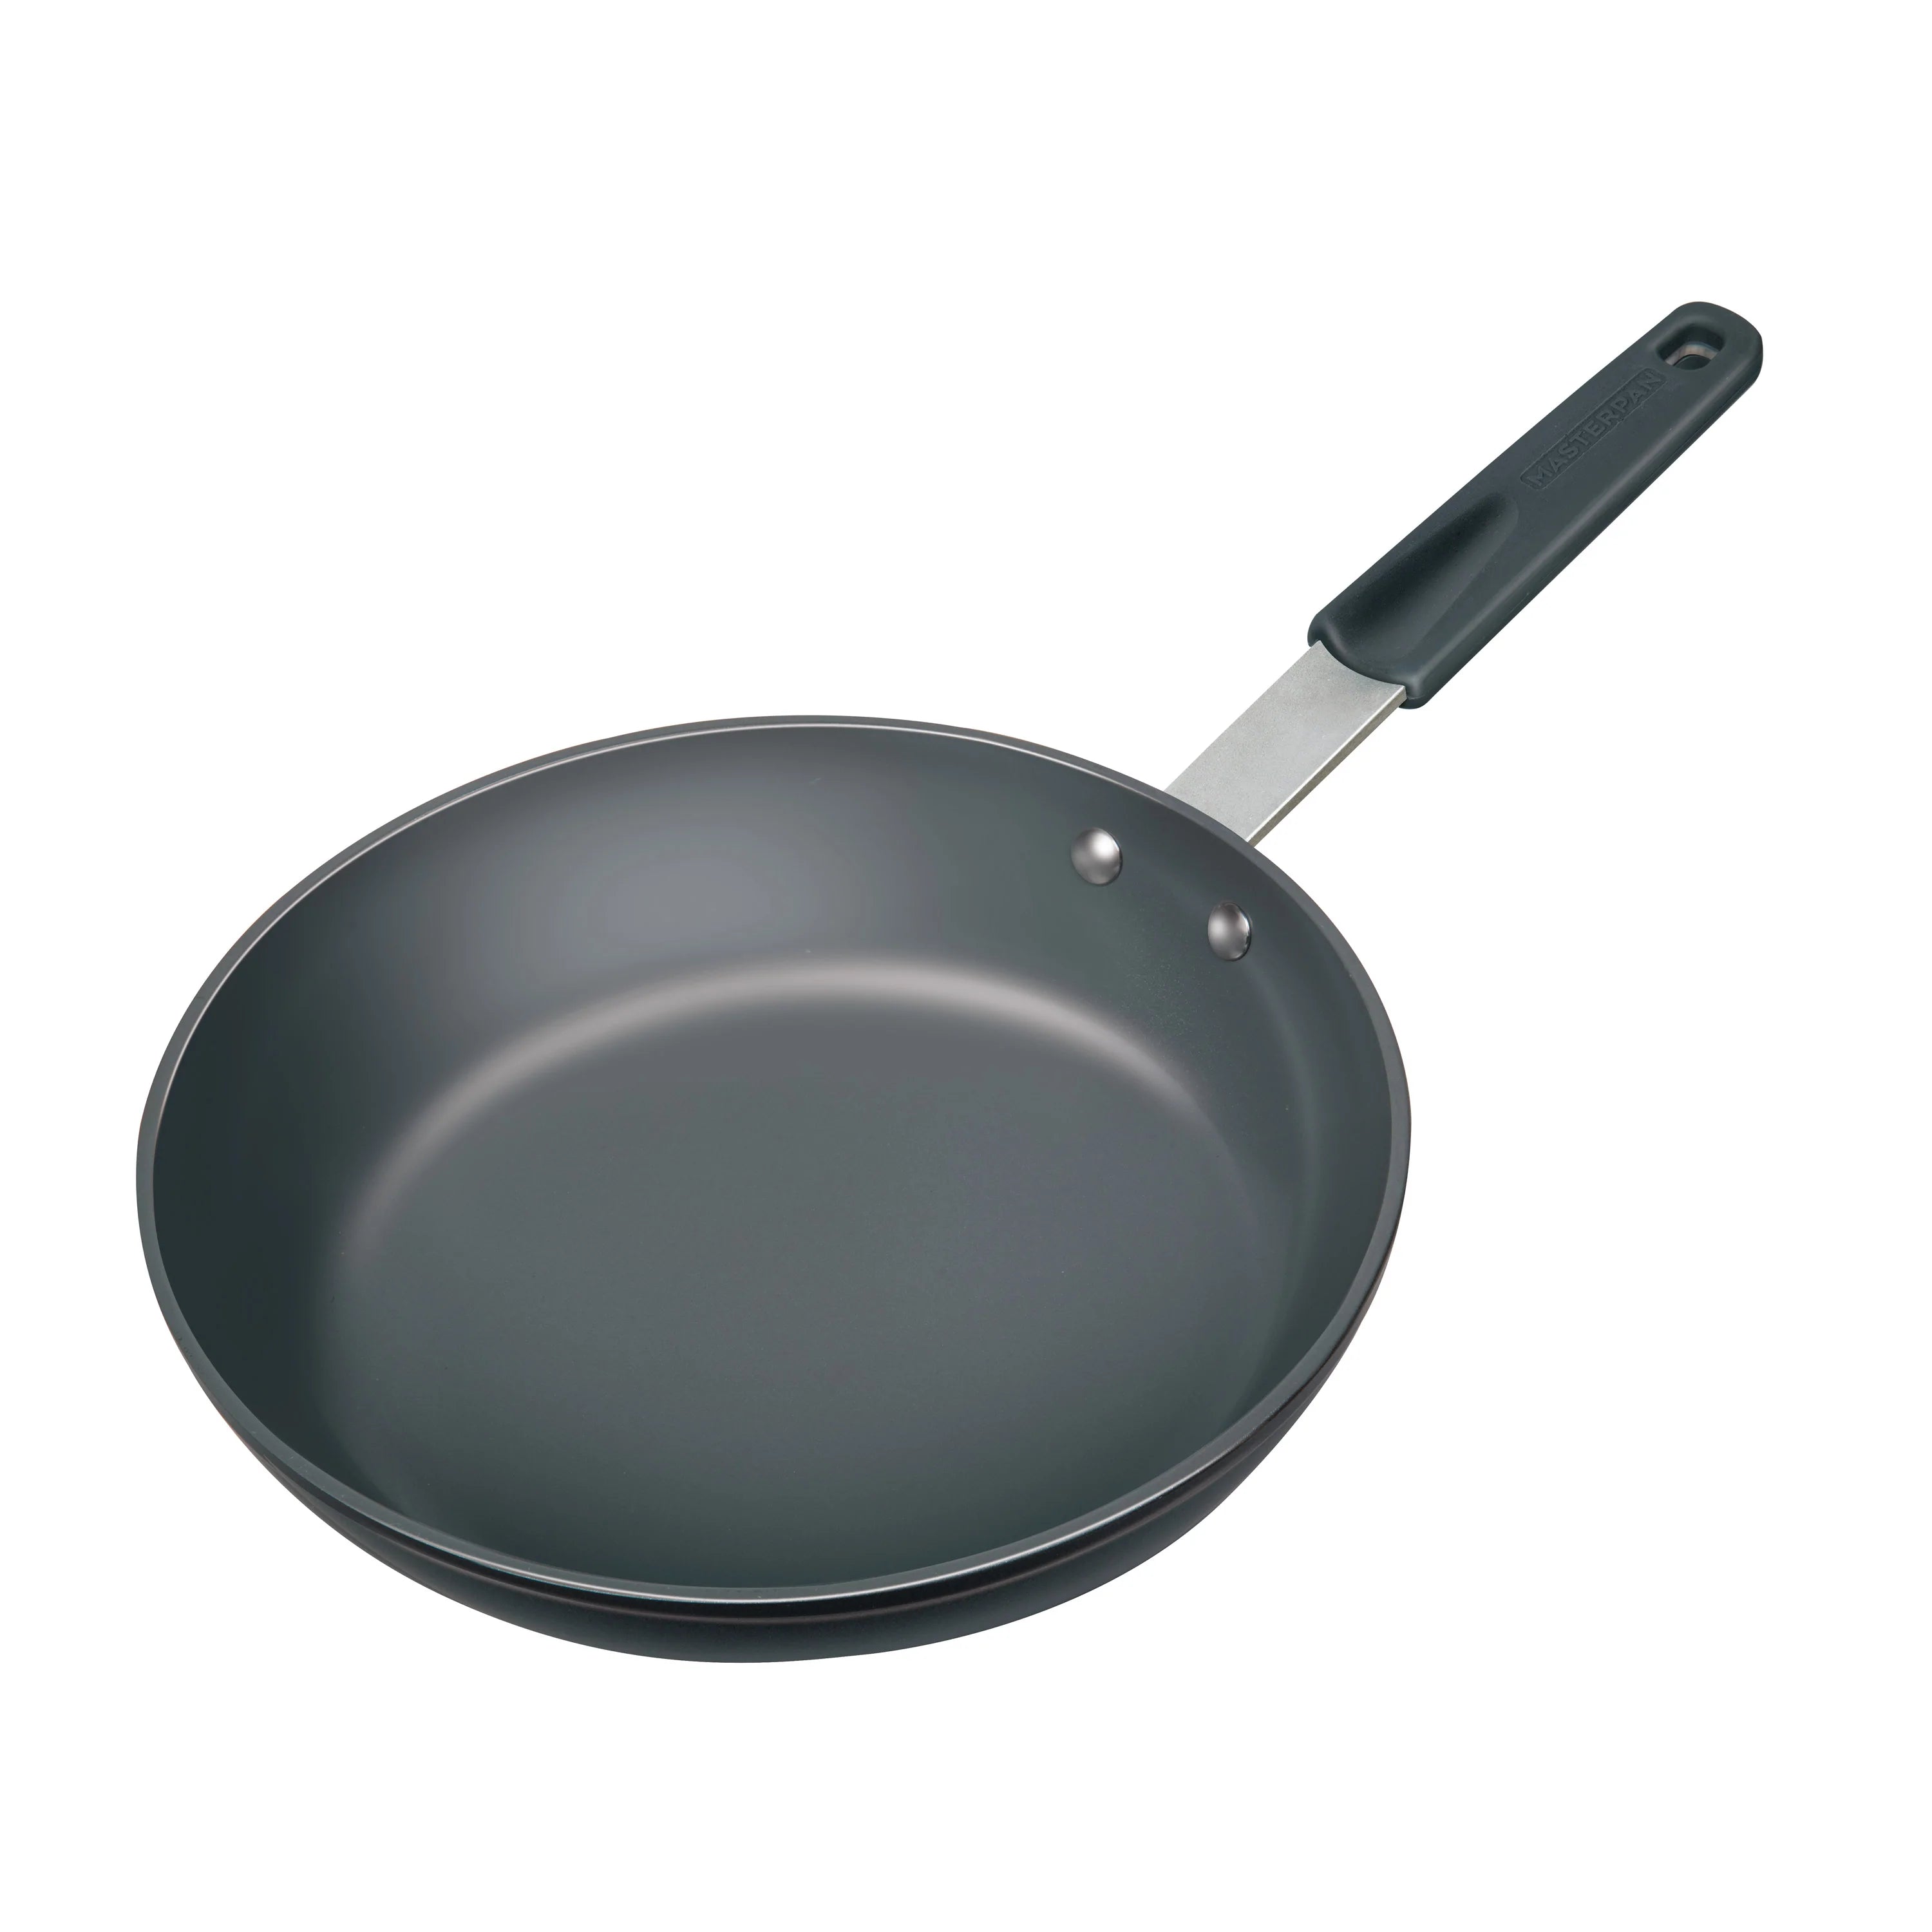 http://kitchenoasis.com/cdn/shop/files/MASTERPAN-Chefs-Series-8-4-Layer-Ceramic-Re-Enforced-Non-Stick-Cast-Aluminum-Frying-Pan-and-Skillet-With-Riveted-Stainless-Steel-Handle-and-Removable-Silicone-Handle-Cover.webp?v=1685839960